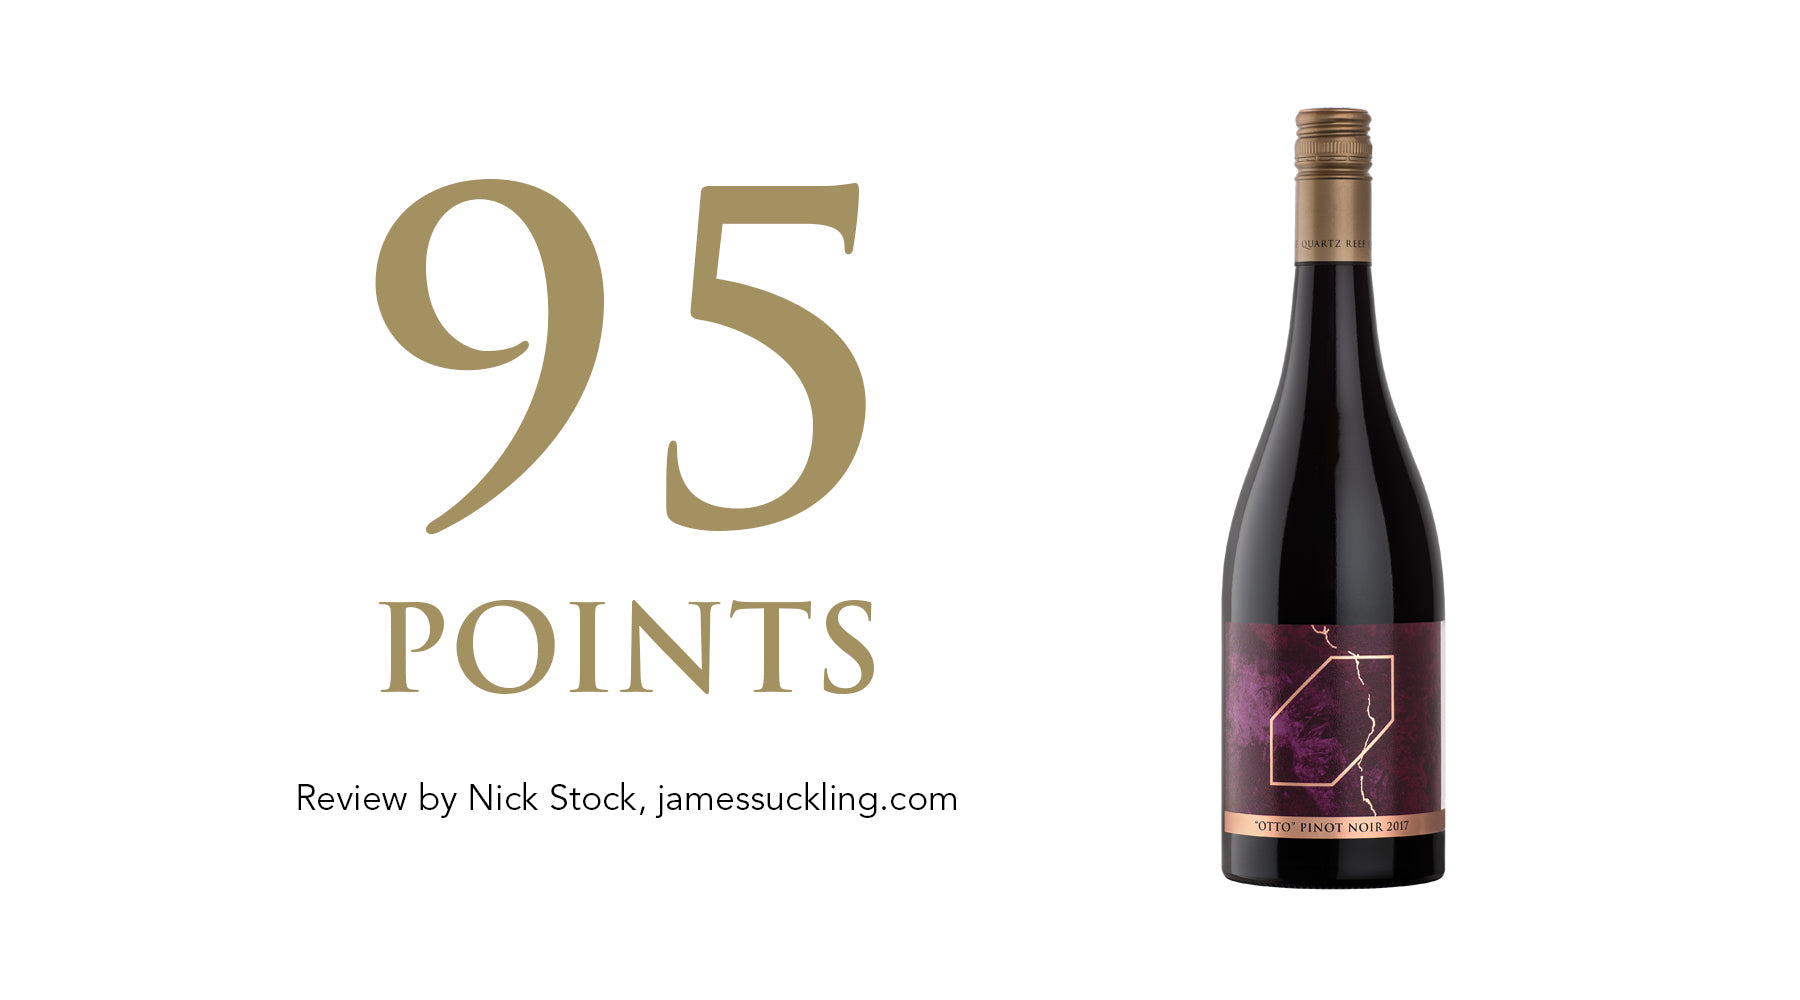 Royal Series "Otto" Pinot Noir 2017 - Awarded 95 Points